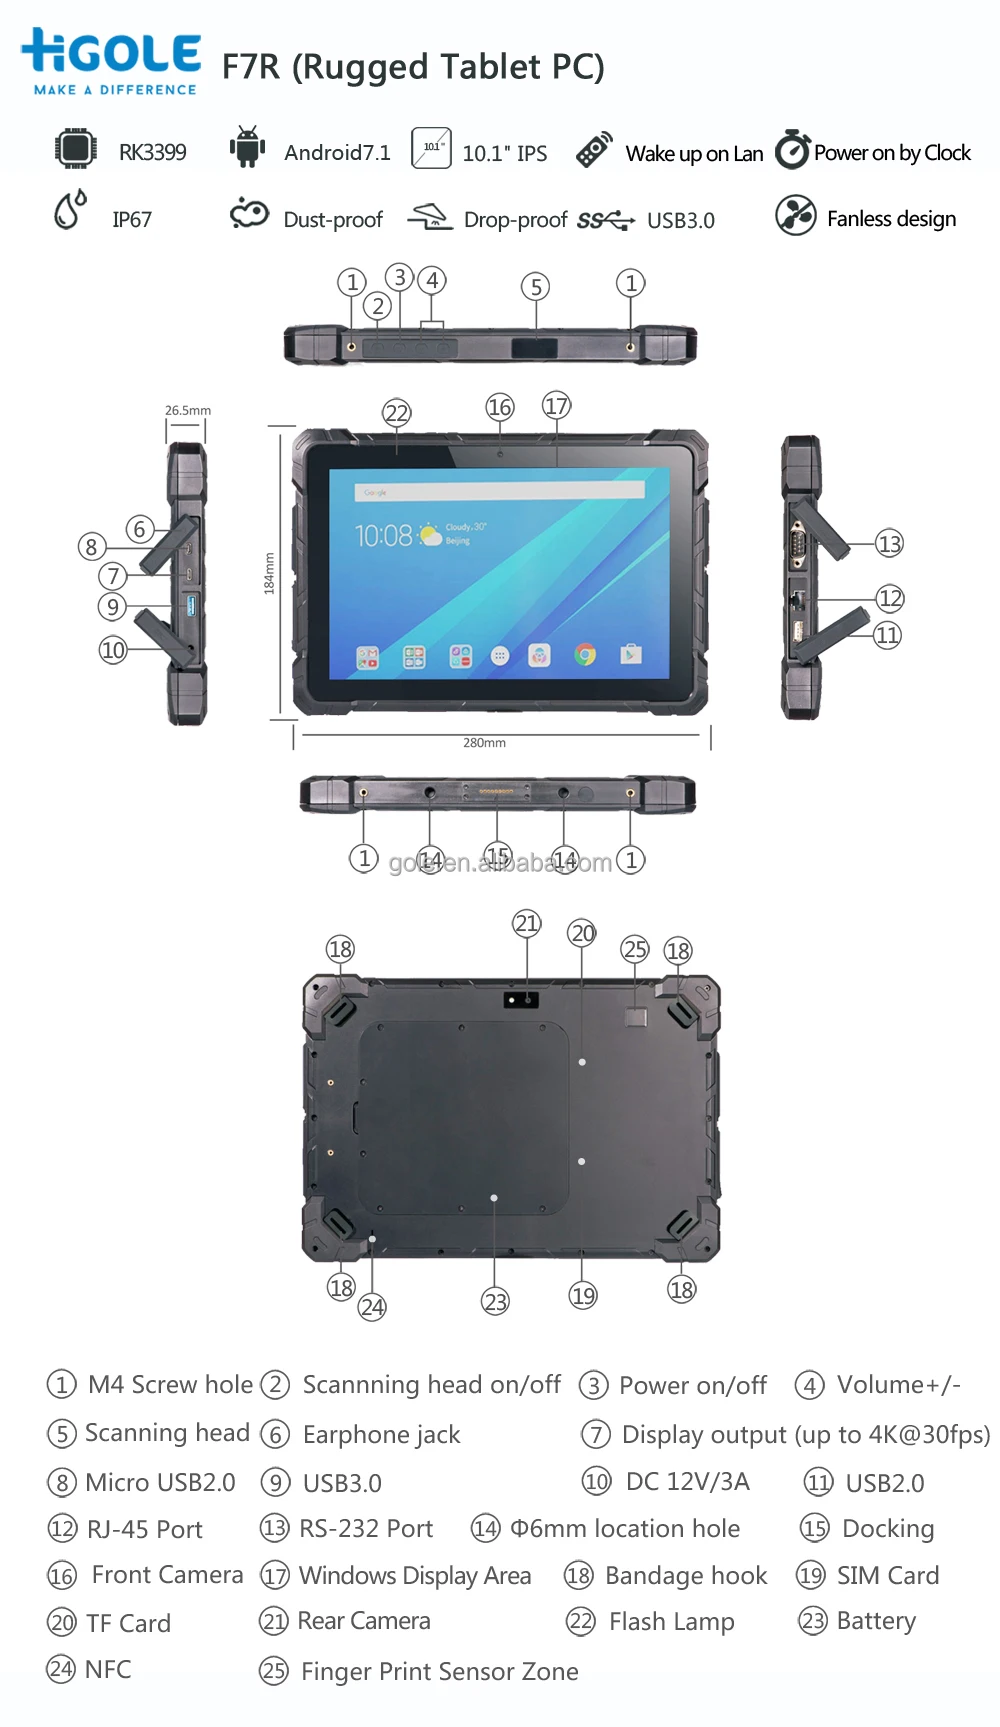 Gole F7 Industrial Ip67 Windows 10 Inch Rugged Tablet Pc Buy Rugged Tablet Pc Higole 10 1 Inch Waterproof Rugged Tablet Pc Ip67 Shockproof Dustproof Rugged Tablet Pc Product On Alibaba Com